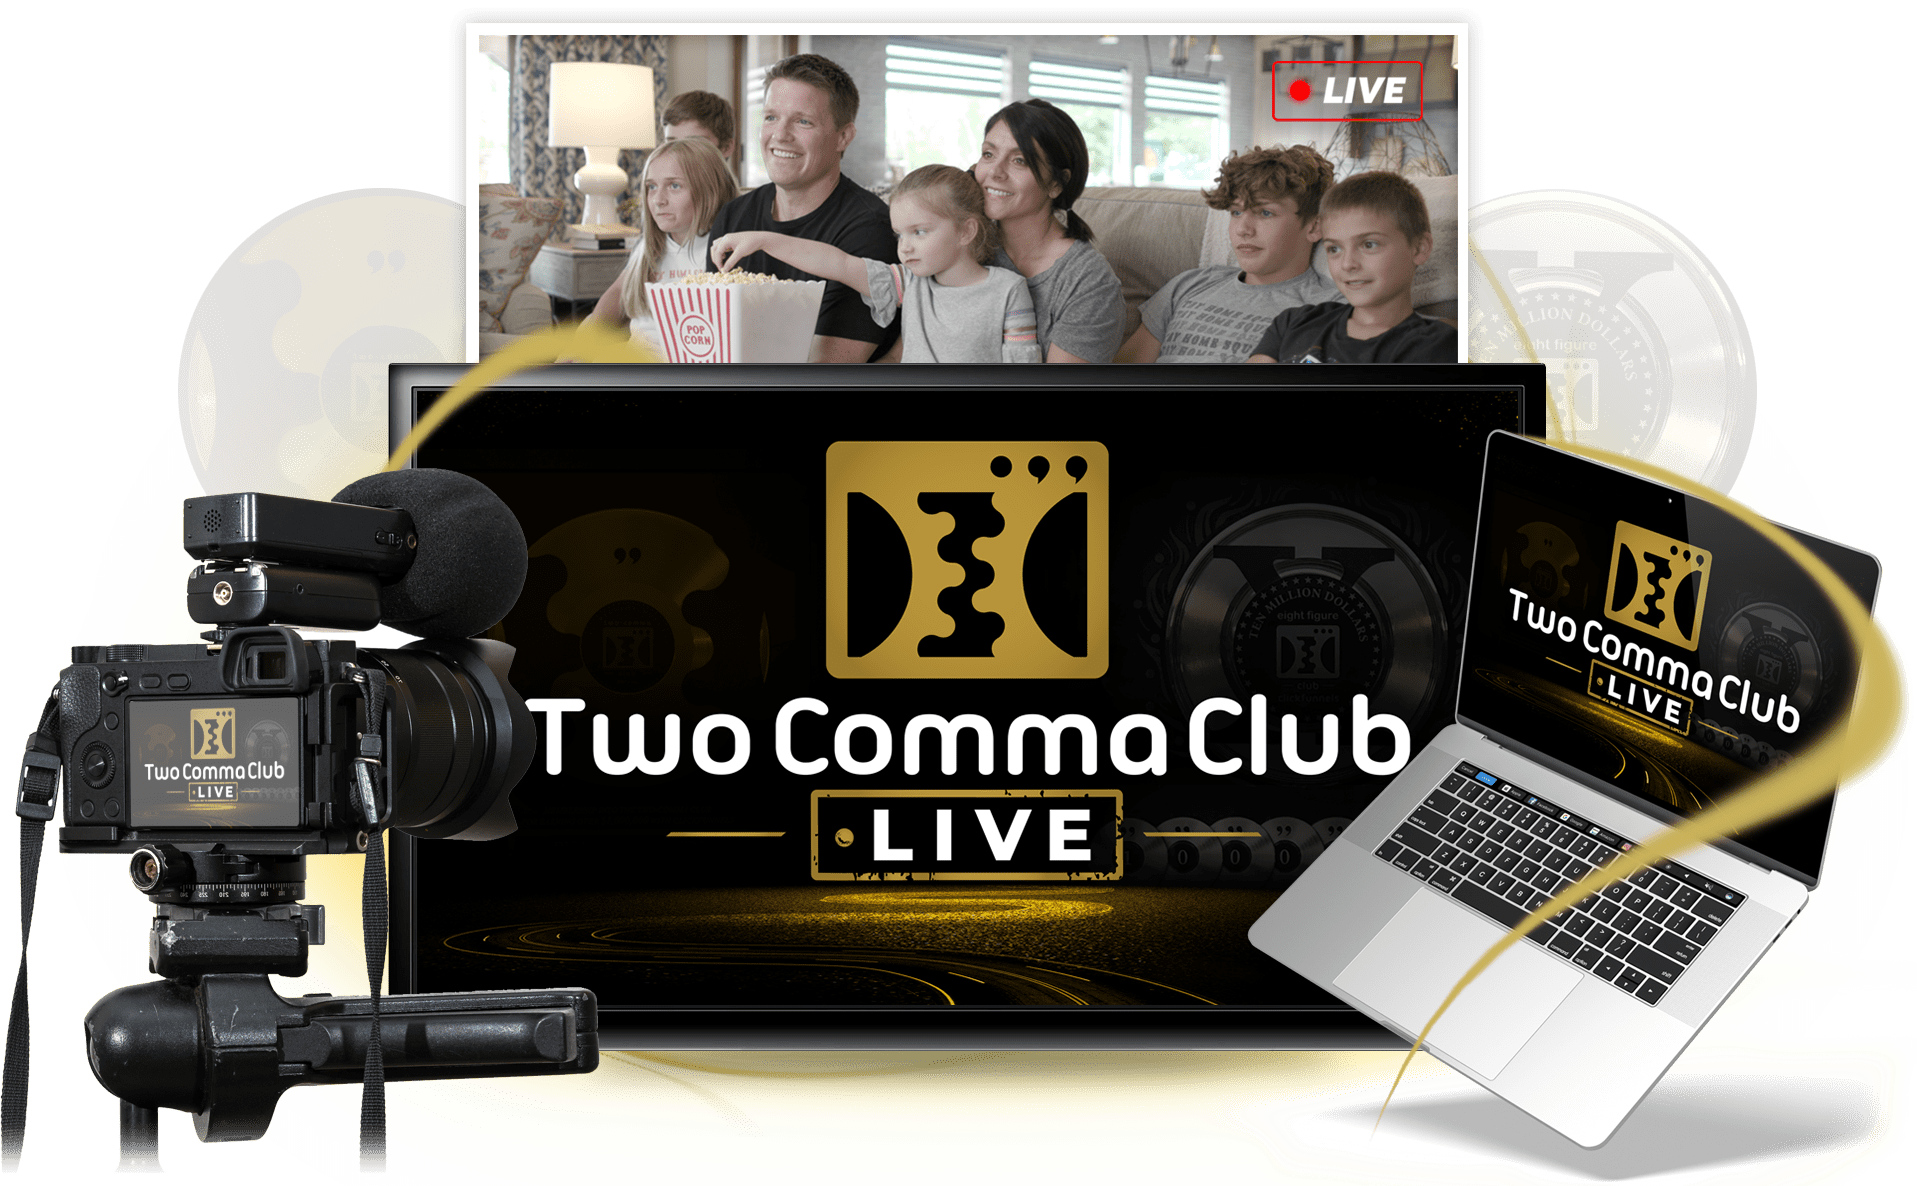 [SUPER HOT SHARE] Russell Brunson – Two Comma Club LIVE Download